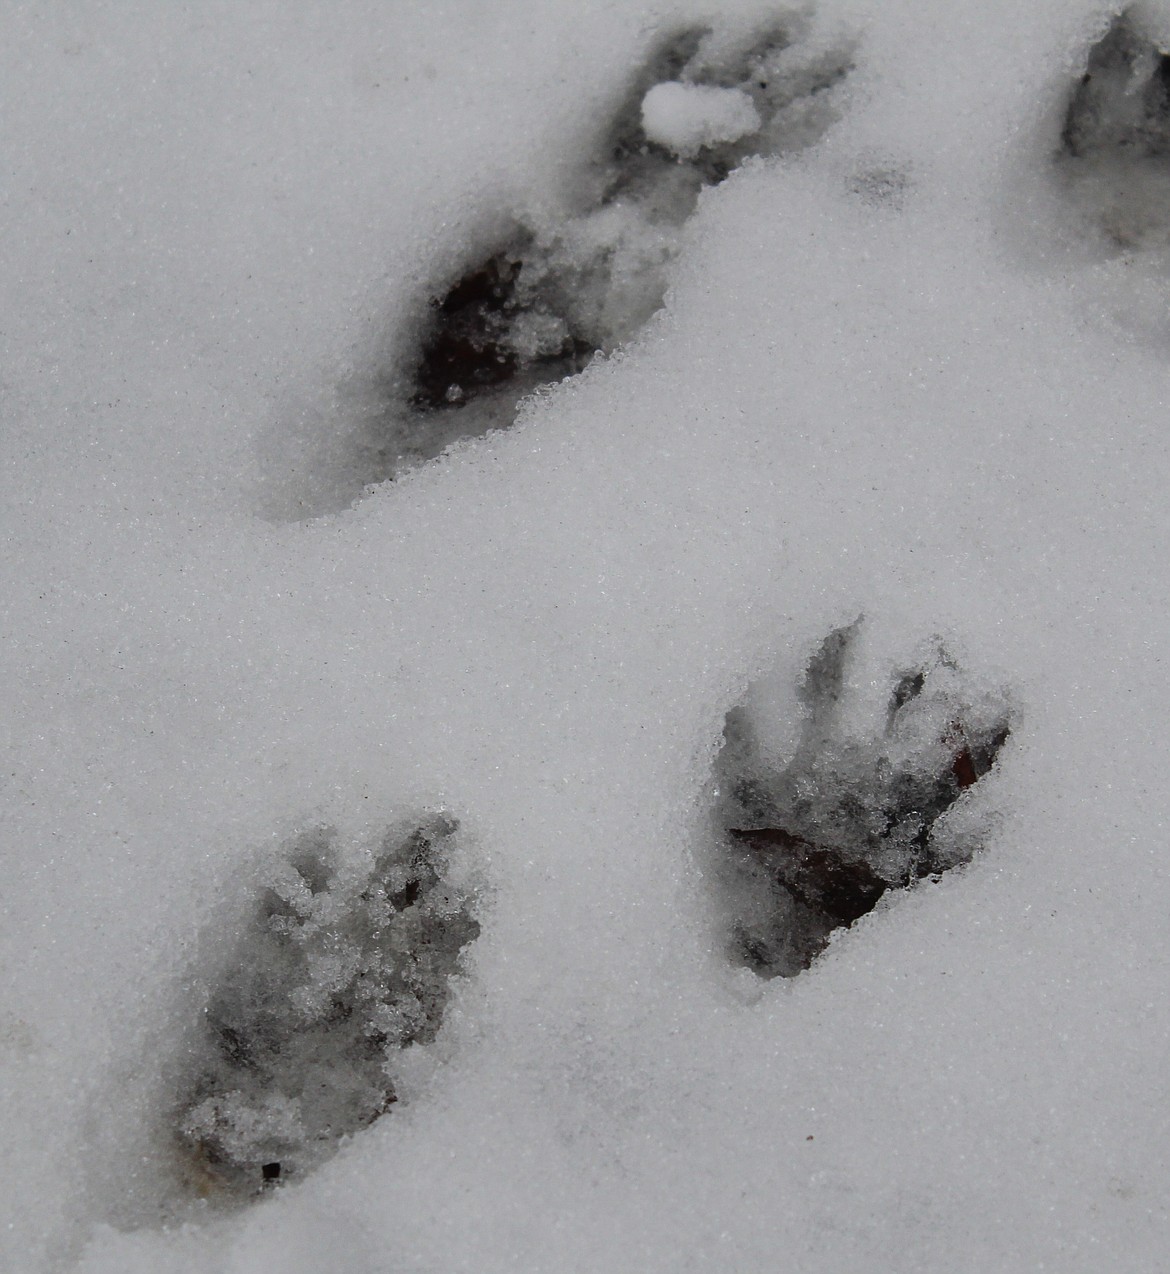 THE animal tracking class at the Owen Sowerwine Natural Area near Kalispell found raccoon tracks that led from a forested area to water and then back. Other tracks found in the crusty snow included: North American river otters, white-tailed deer, pine squirrels, muskrat, raven, coyote, snowshoe hare and more.